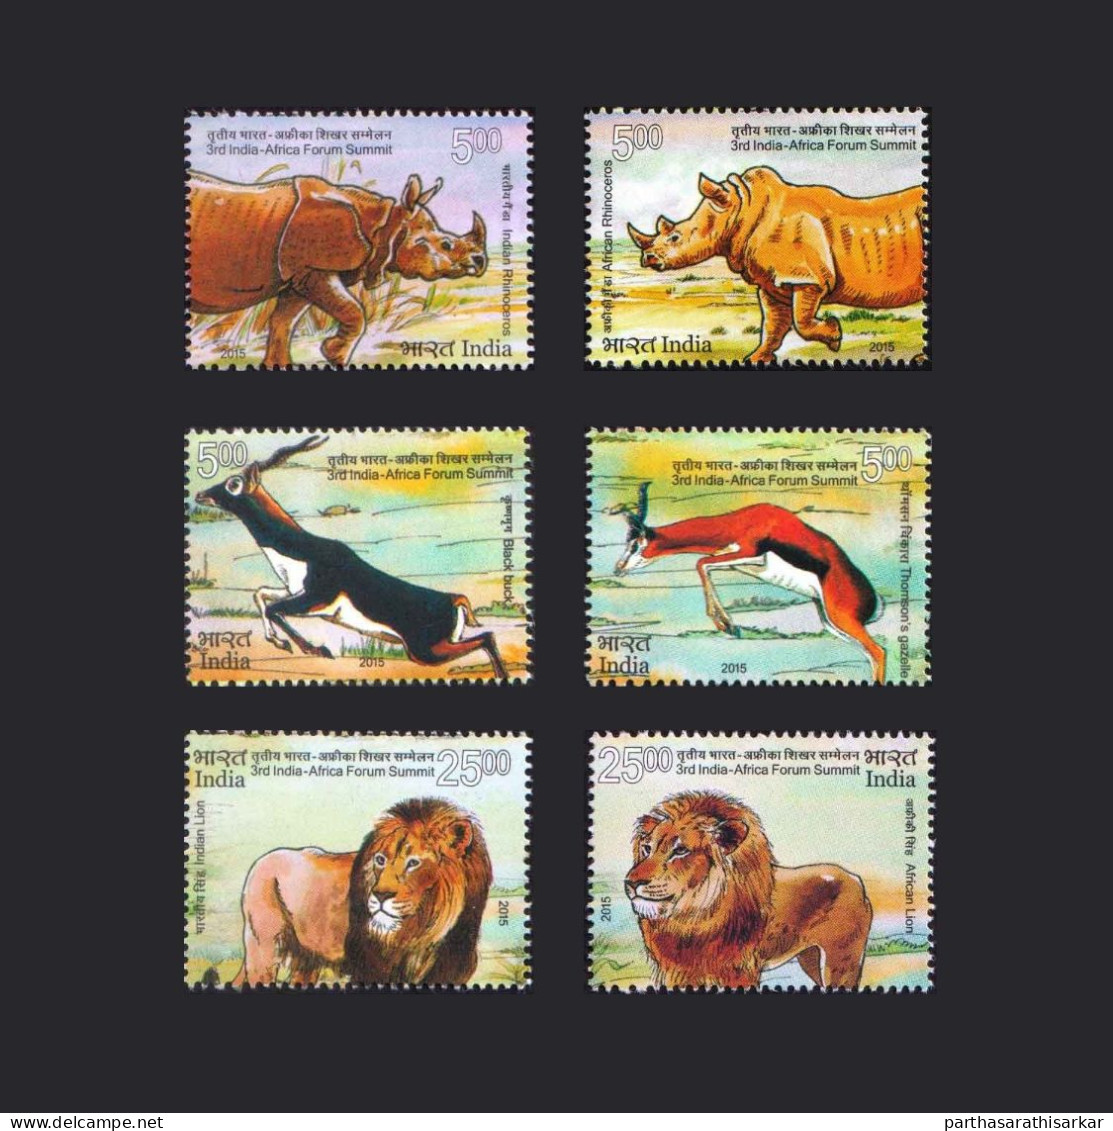 INDIA 2015 3RD INDIA-AFRICA FORUM SUMMIT FAUNA ANIMALS COMPLETE SET OF 6V STAMPS MNH - Nuevos